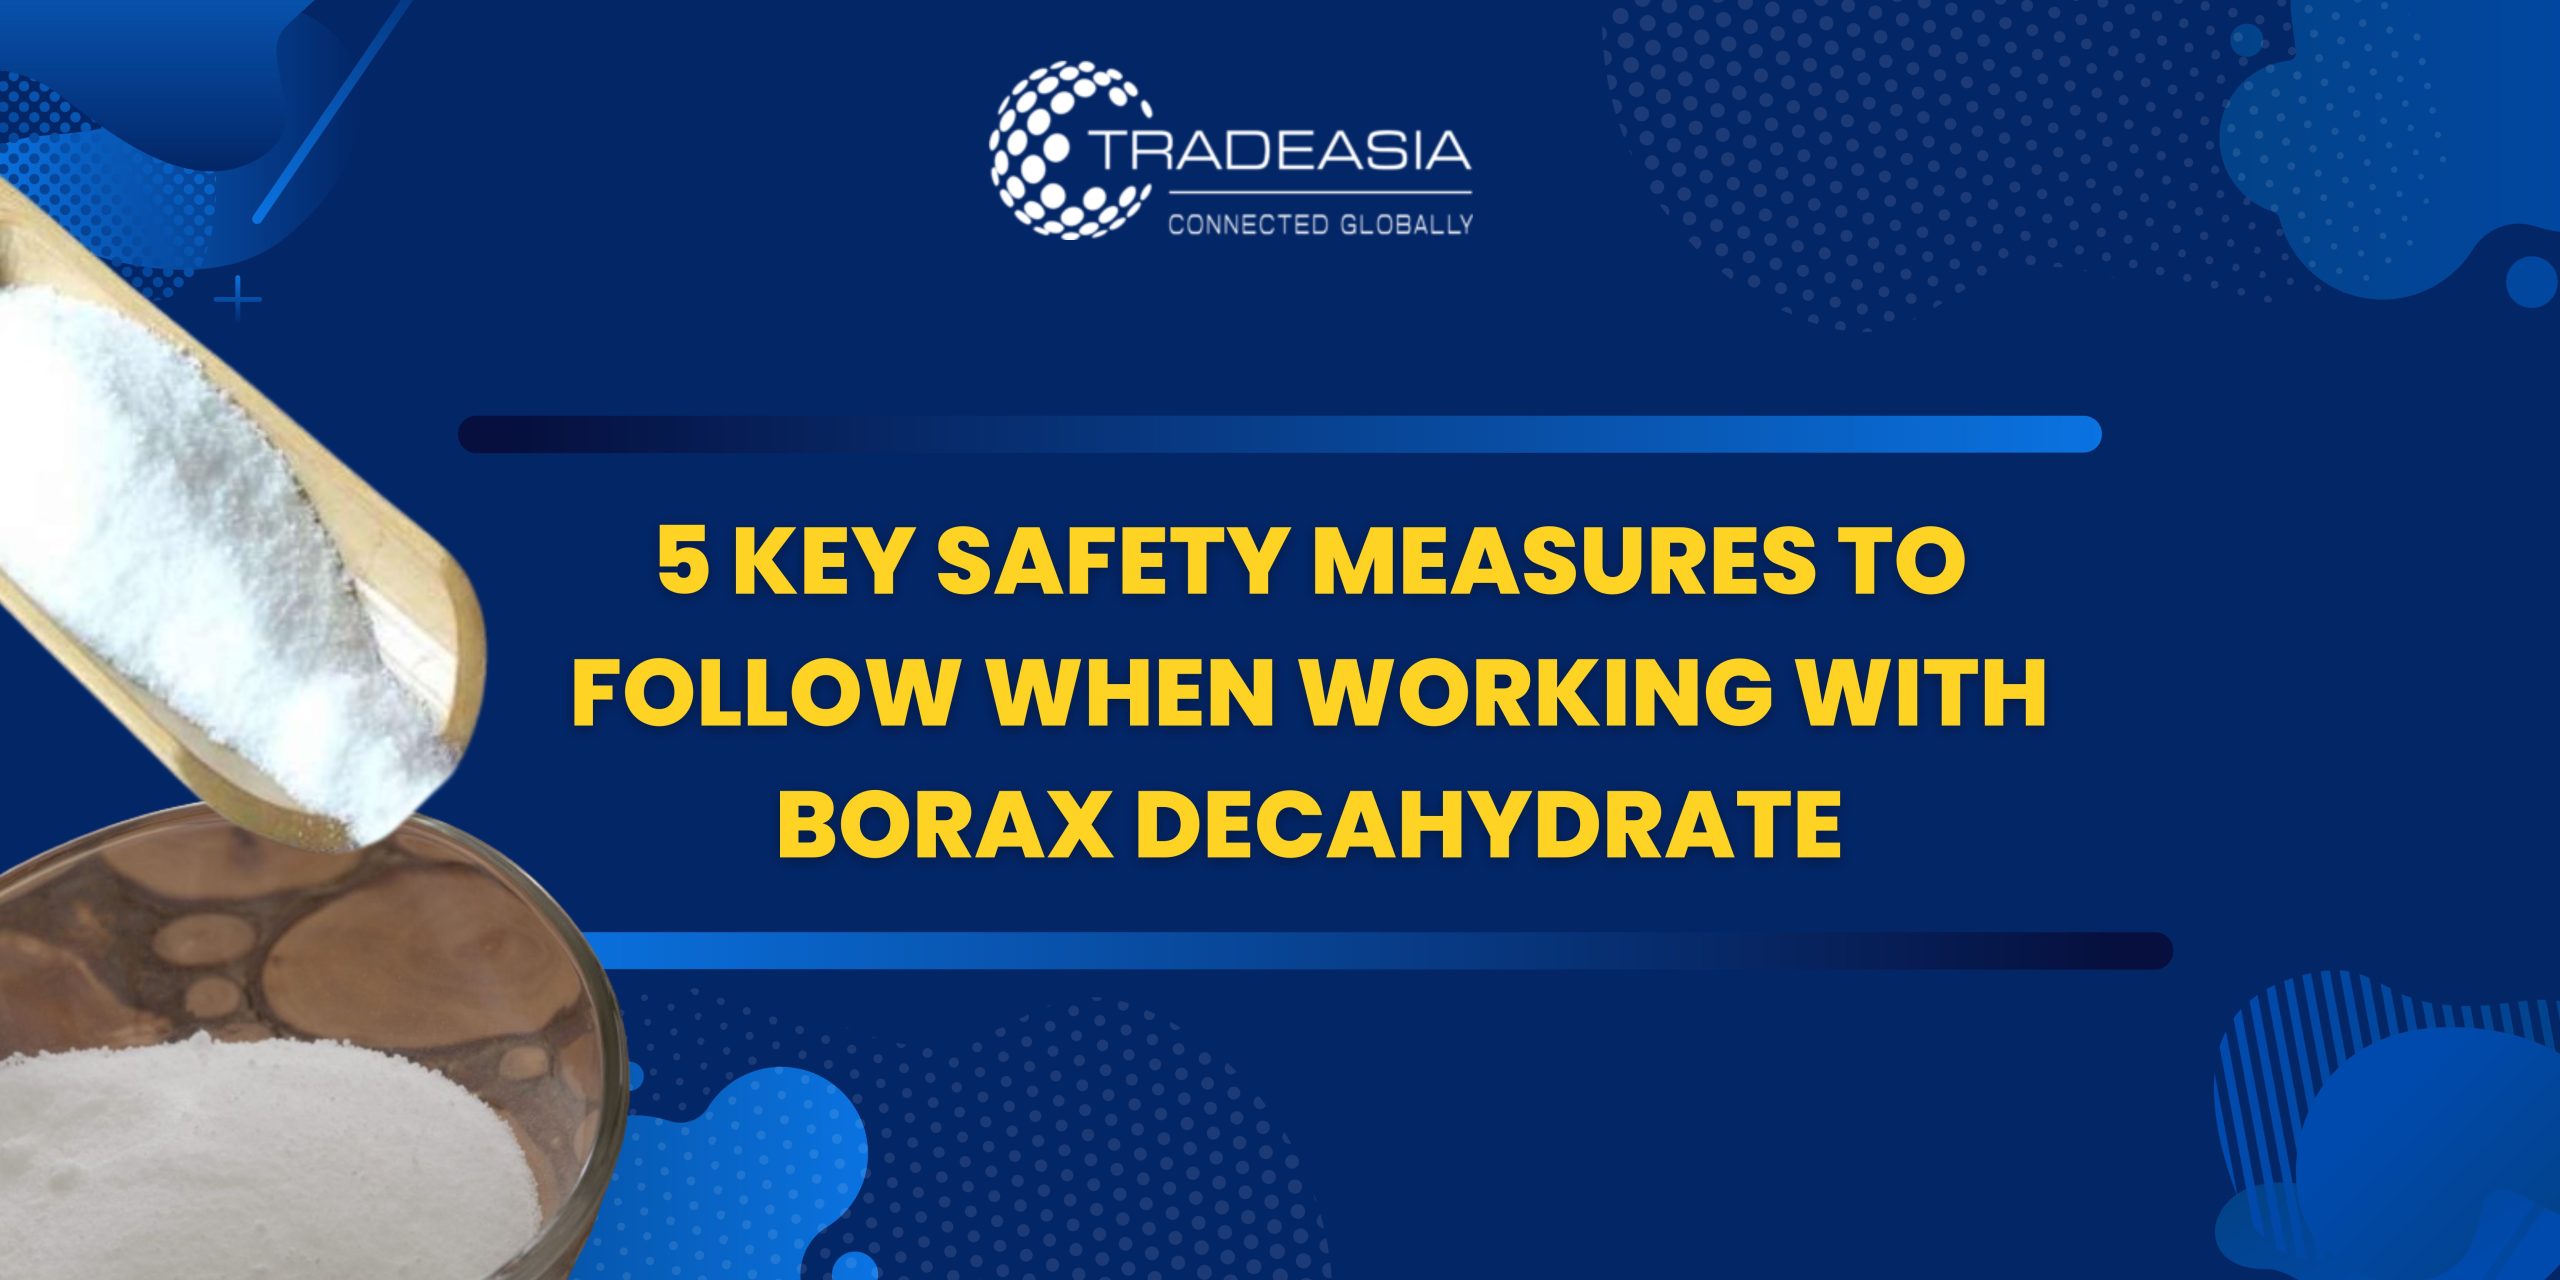 5 Key Safety Measures to Follow When Working with Borax Decahydrate